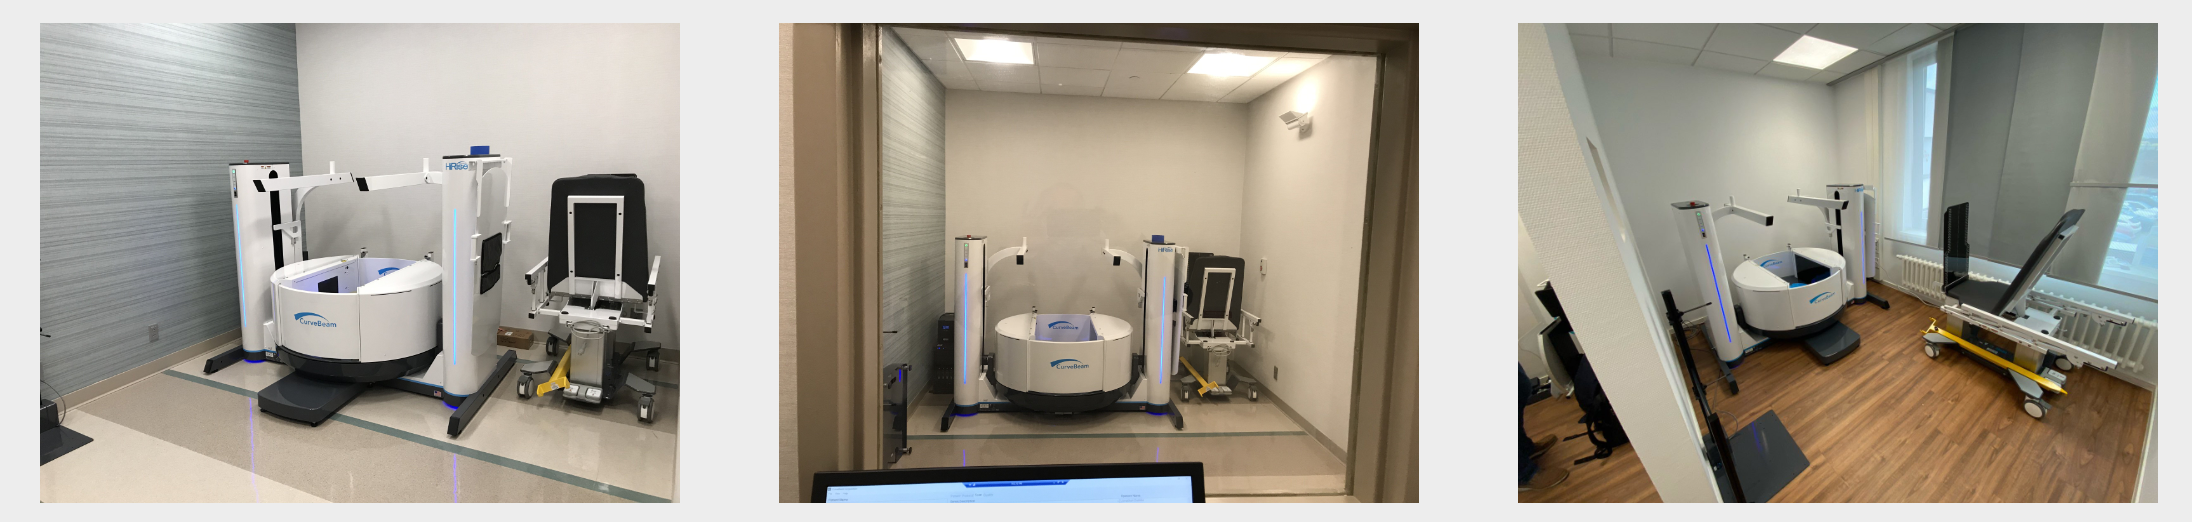 CurveBeam's equipment is designed to fit comfortably inside clinics